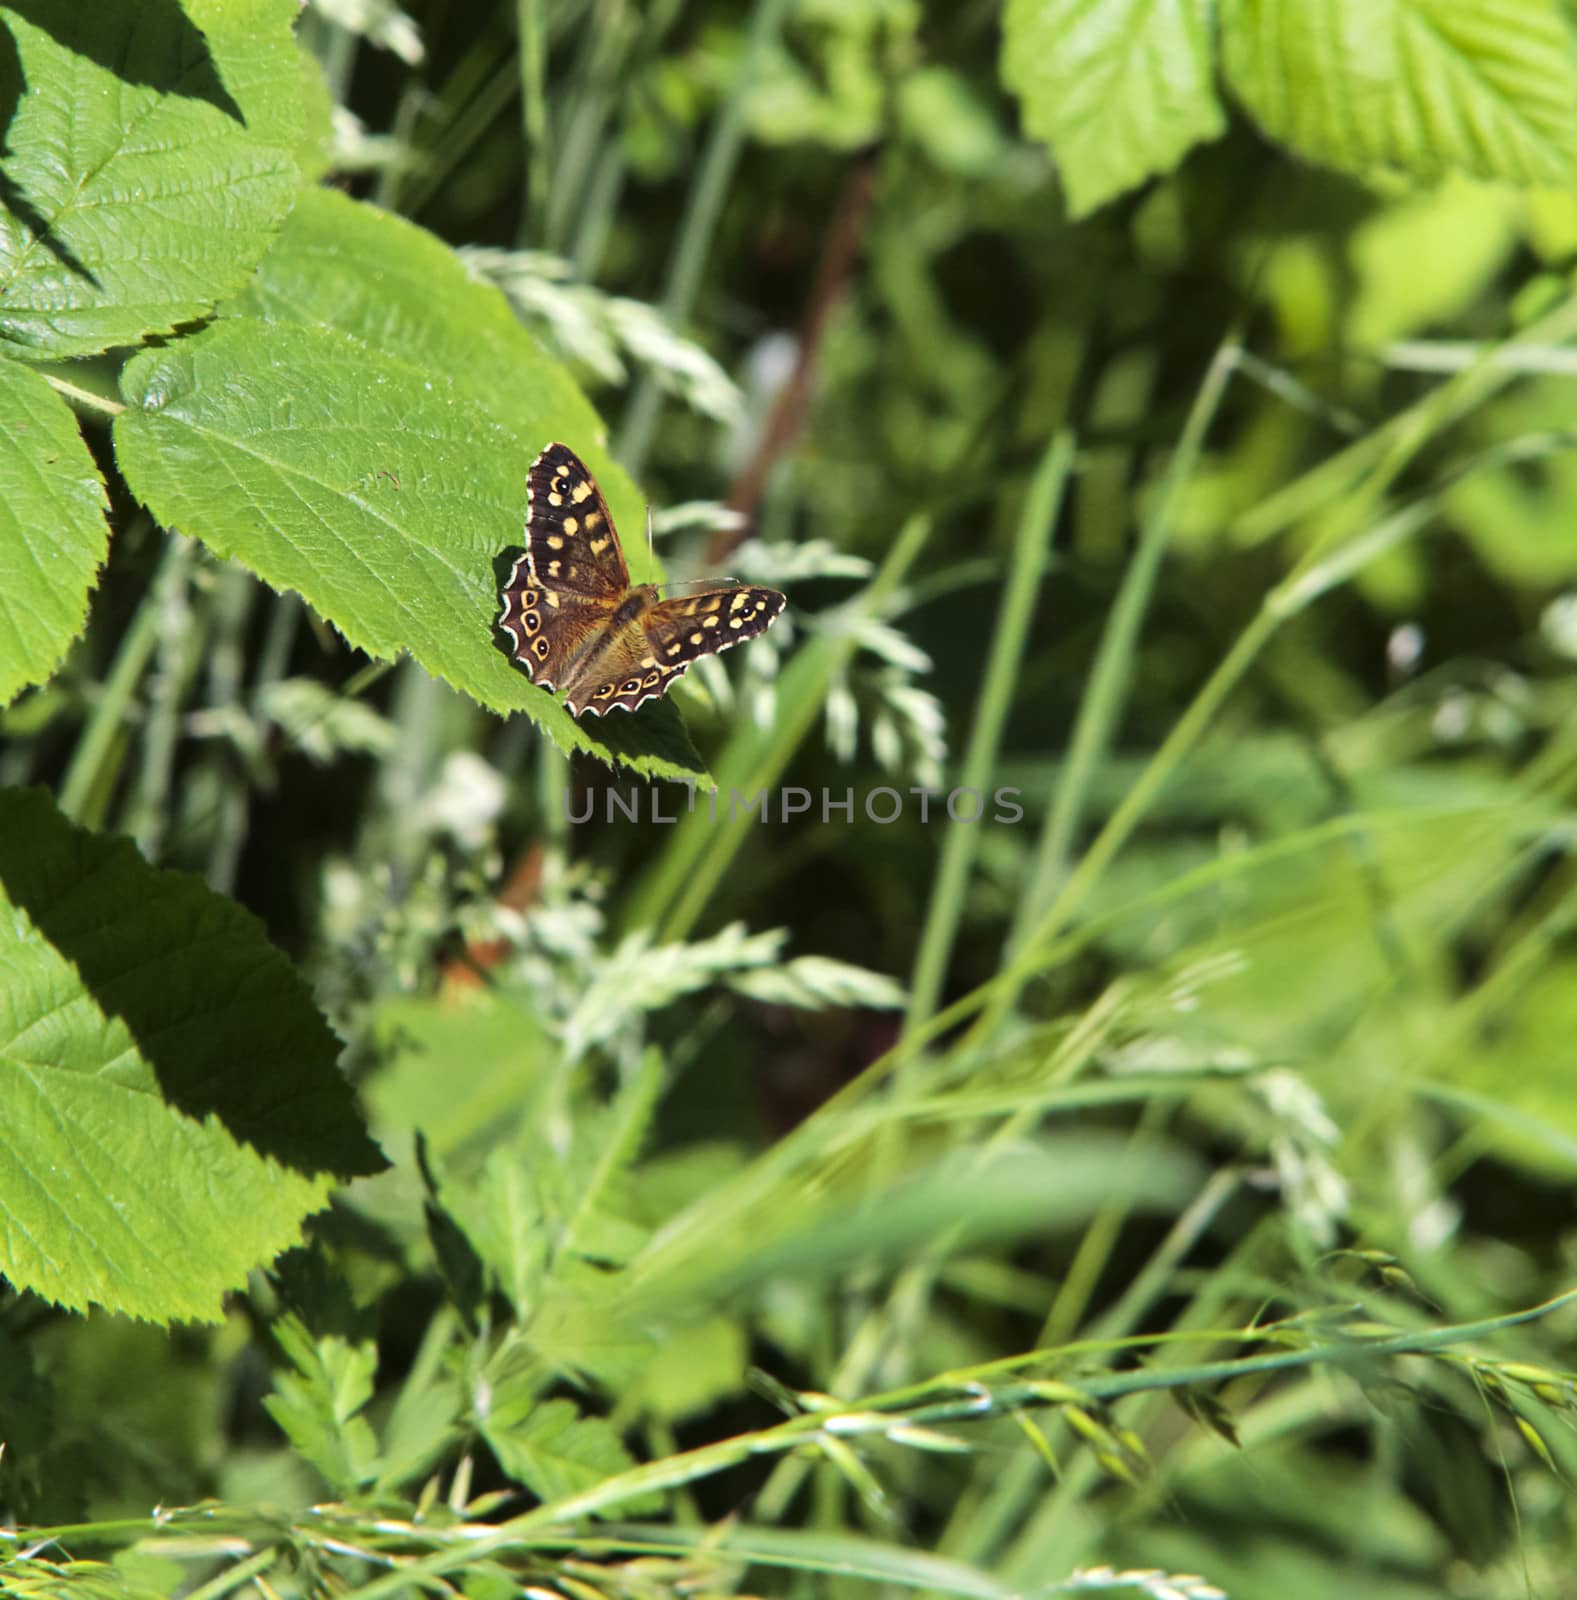 speckled wood butterfly (Pararge aegeria) on a leaf in woodland